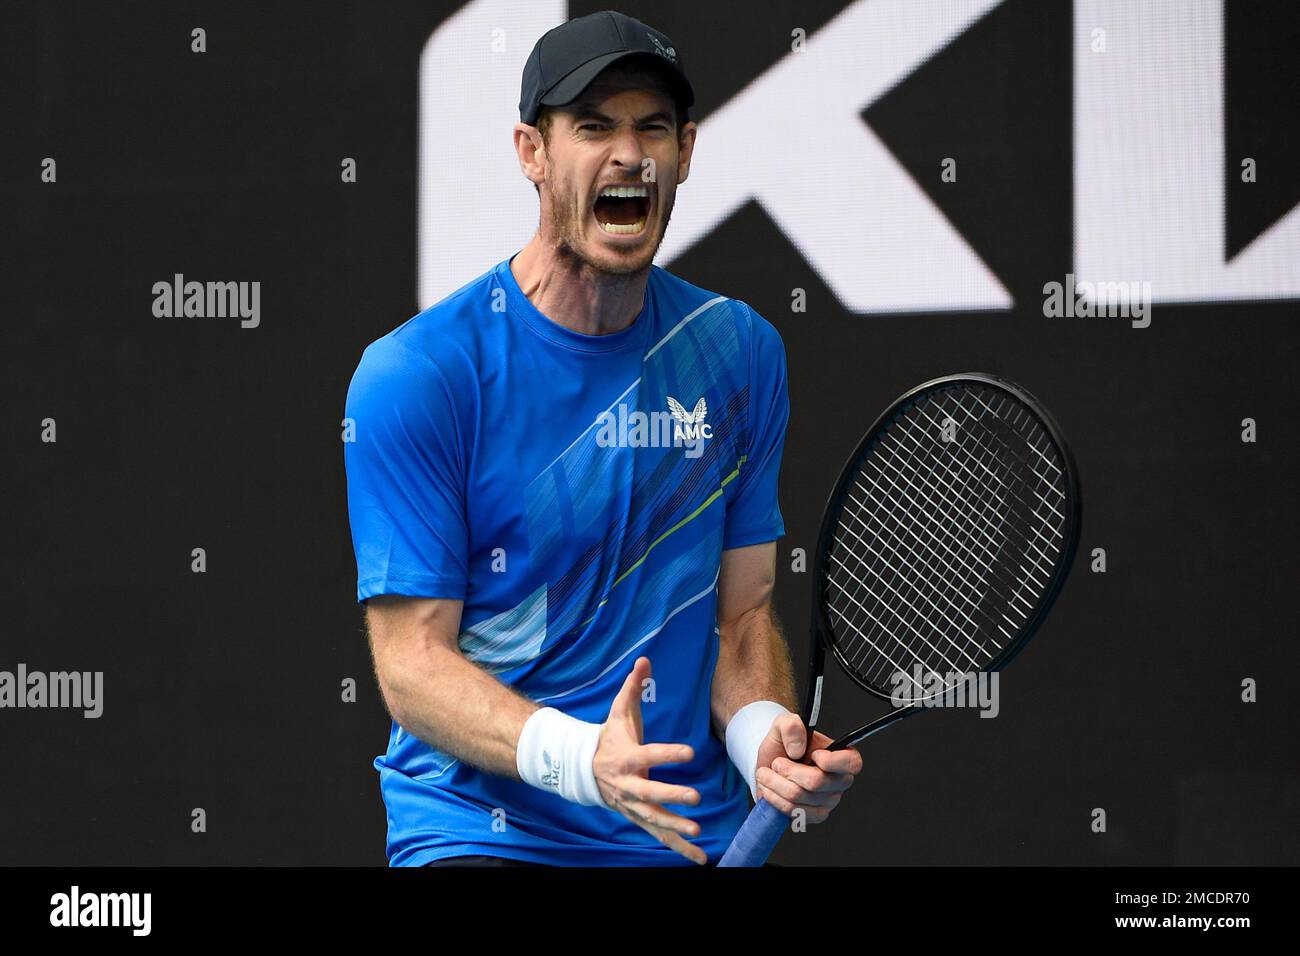 Andy Murray of Britain reacts after winning a point against Nikoloz Basilashvili of Georgia during their first round match at the Australian Open tennis championships in Melbourne, Australia, Tuesday, Jan